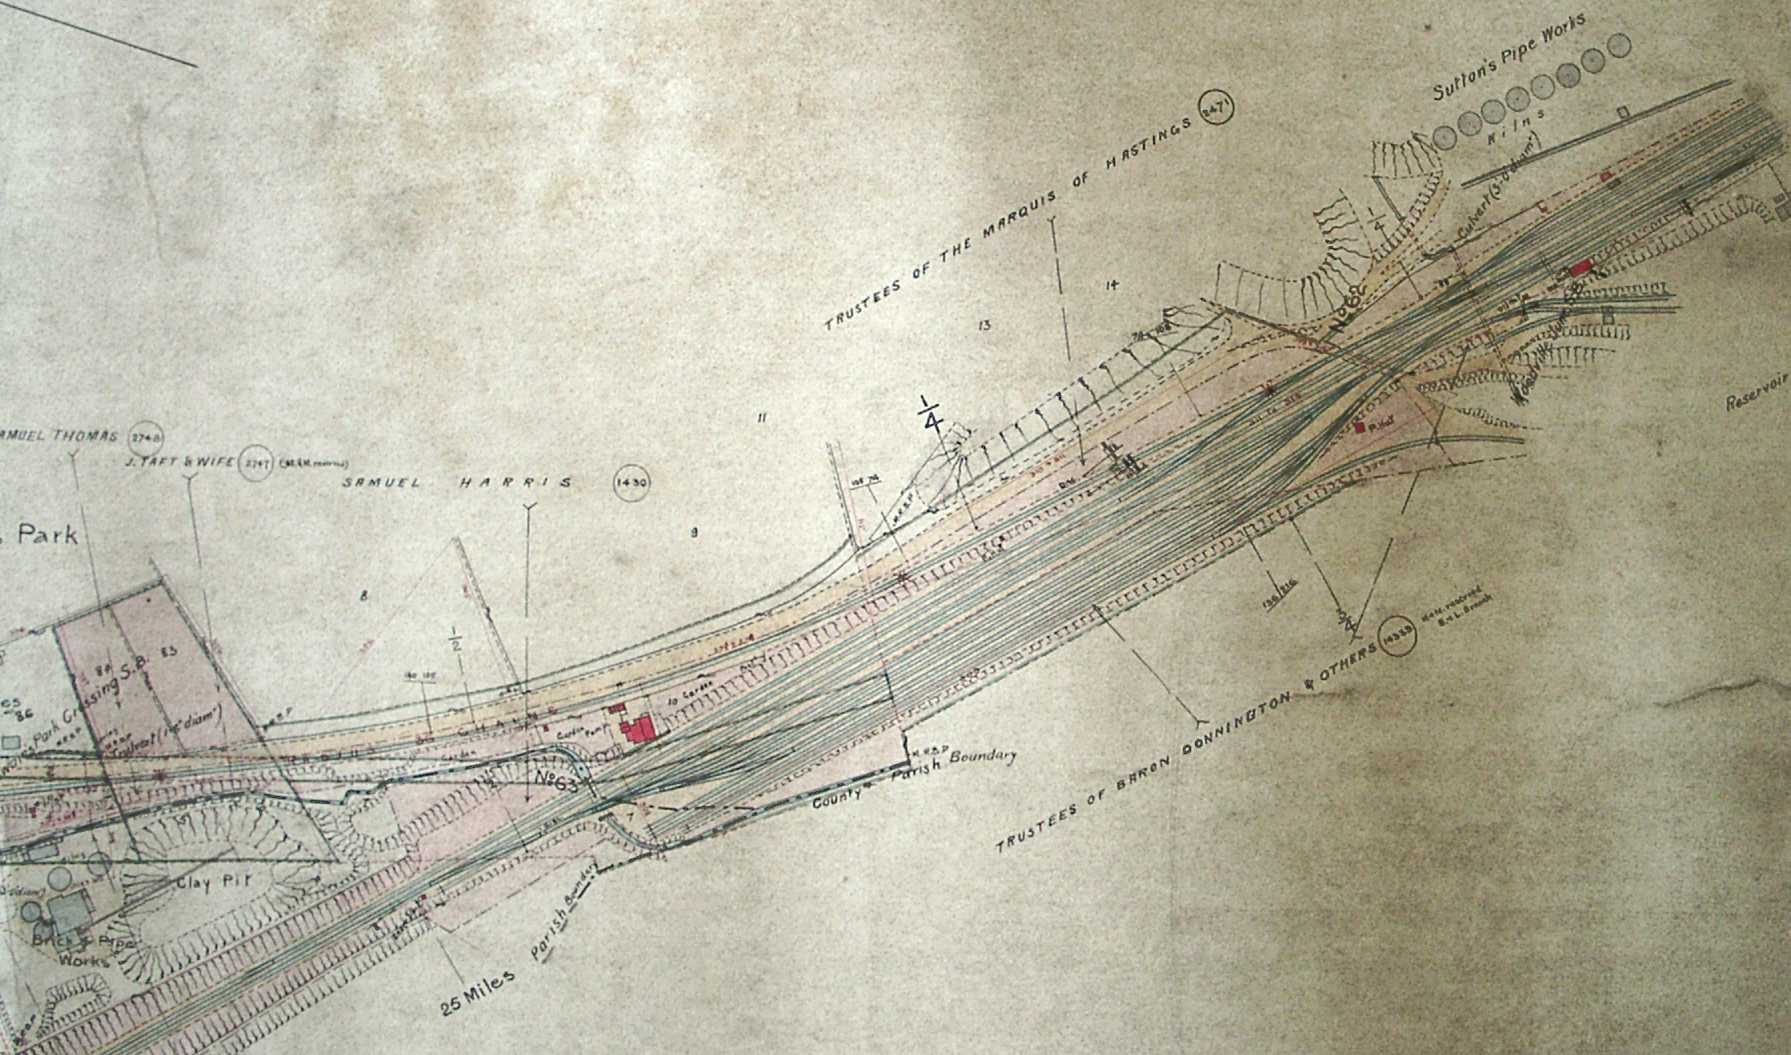 Two Chain Plan of Woodville Junction